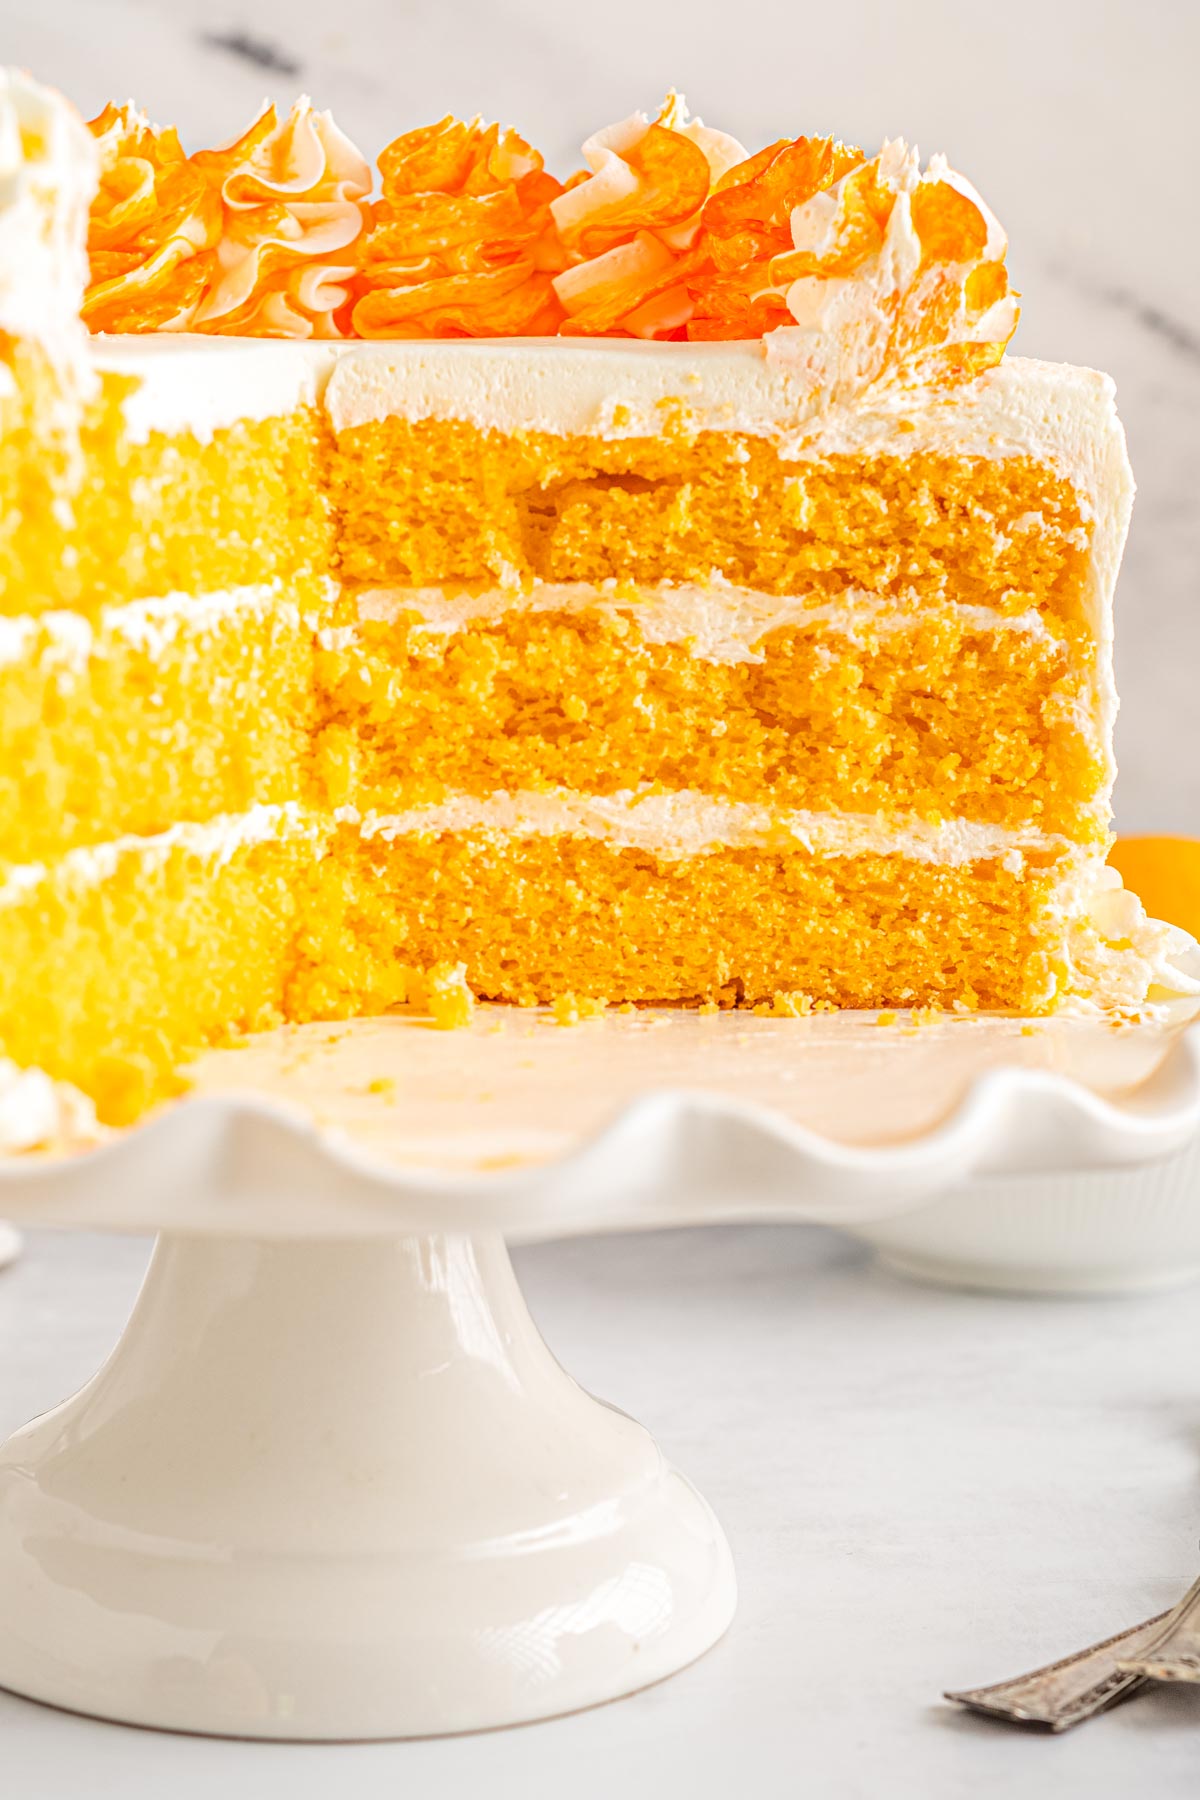 The finished Orange Creamsicle Cake made with Jello on a cake stand that has been cut into so you can see the layers.